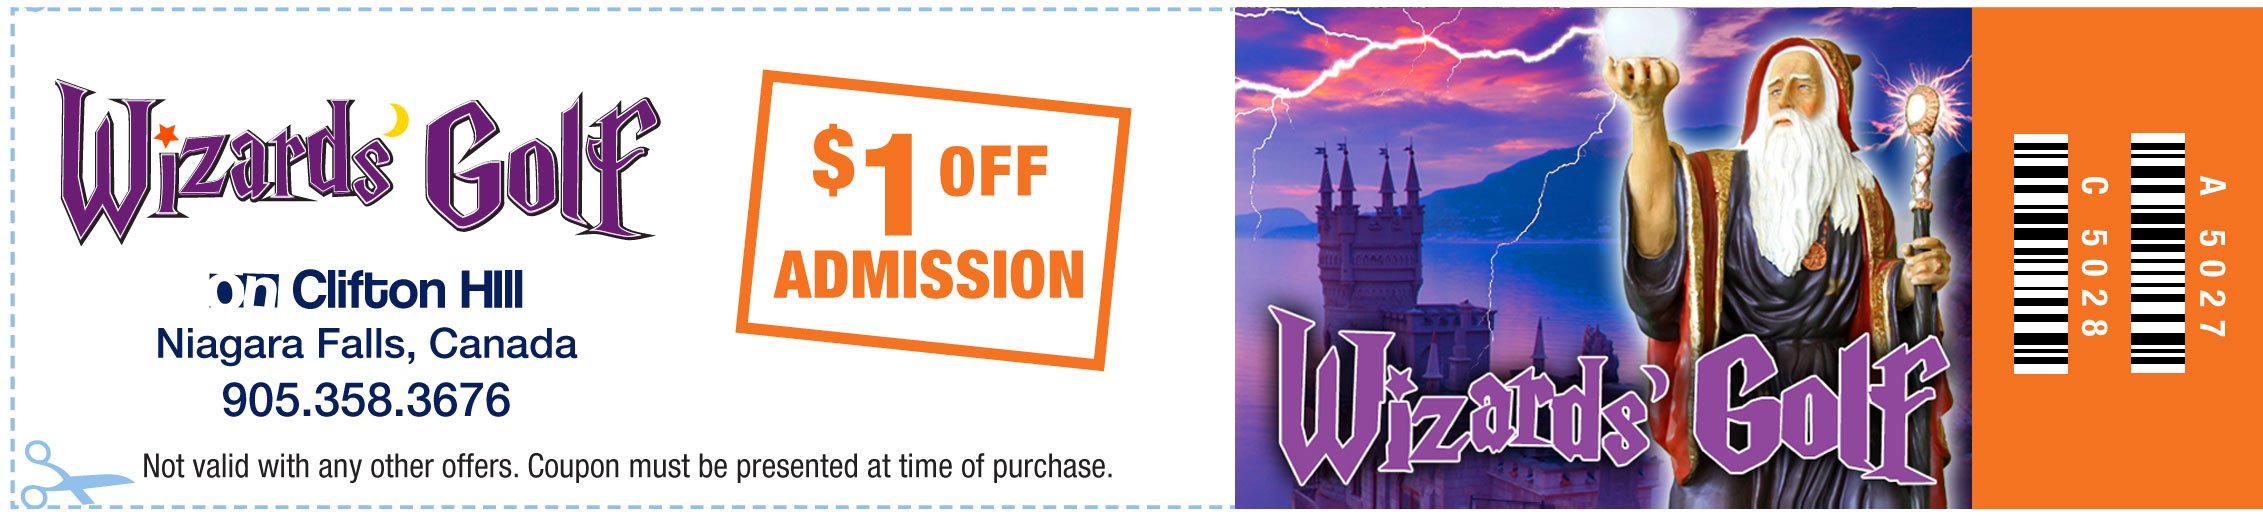 Wizard's Golf Admission Coupon